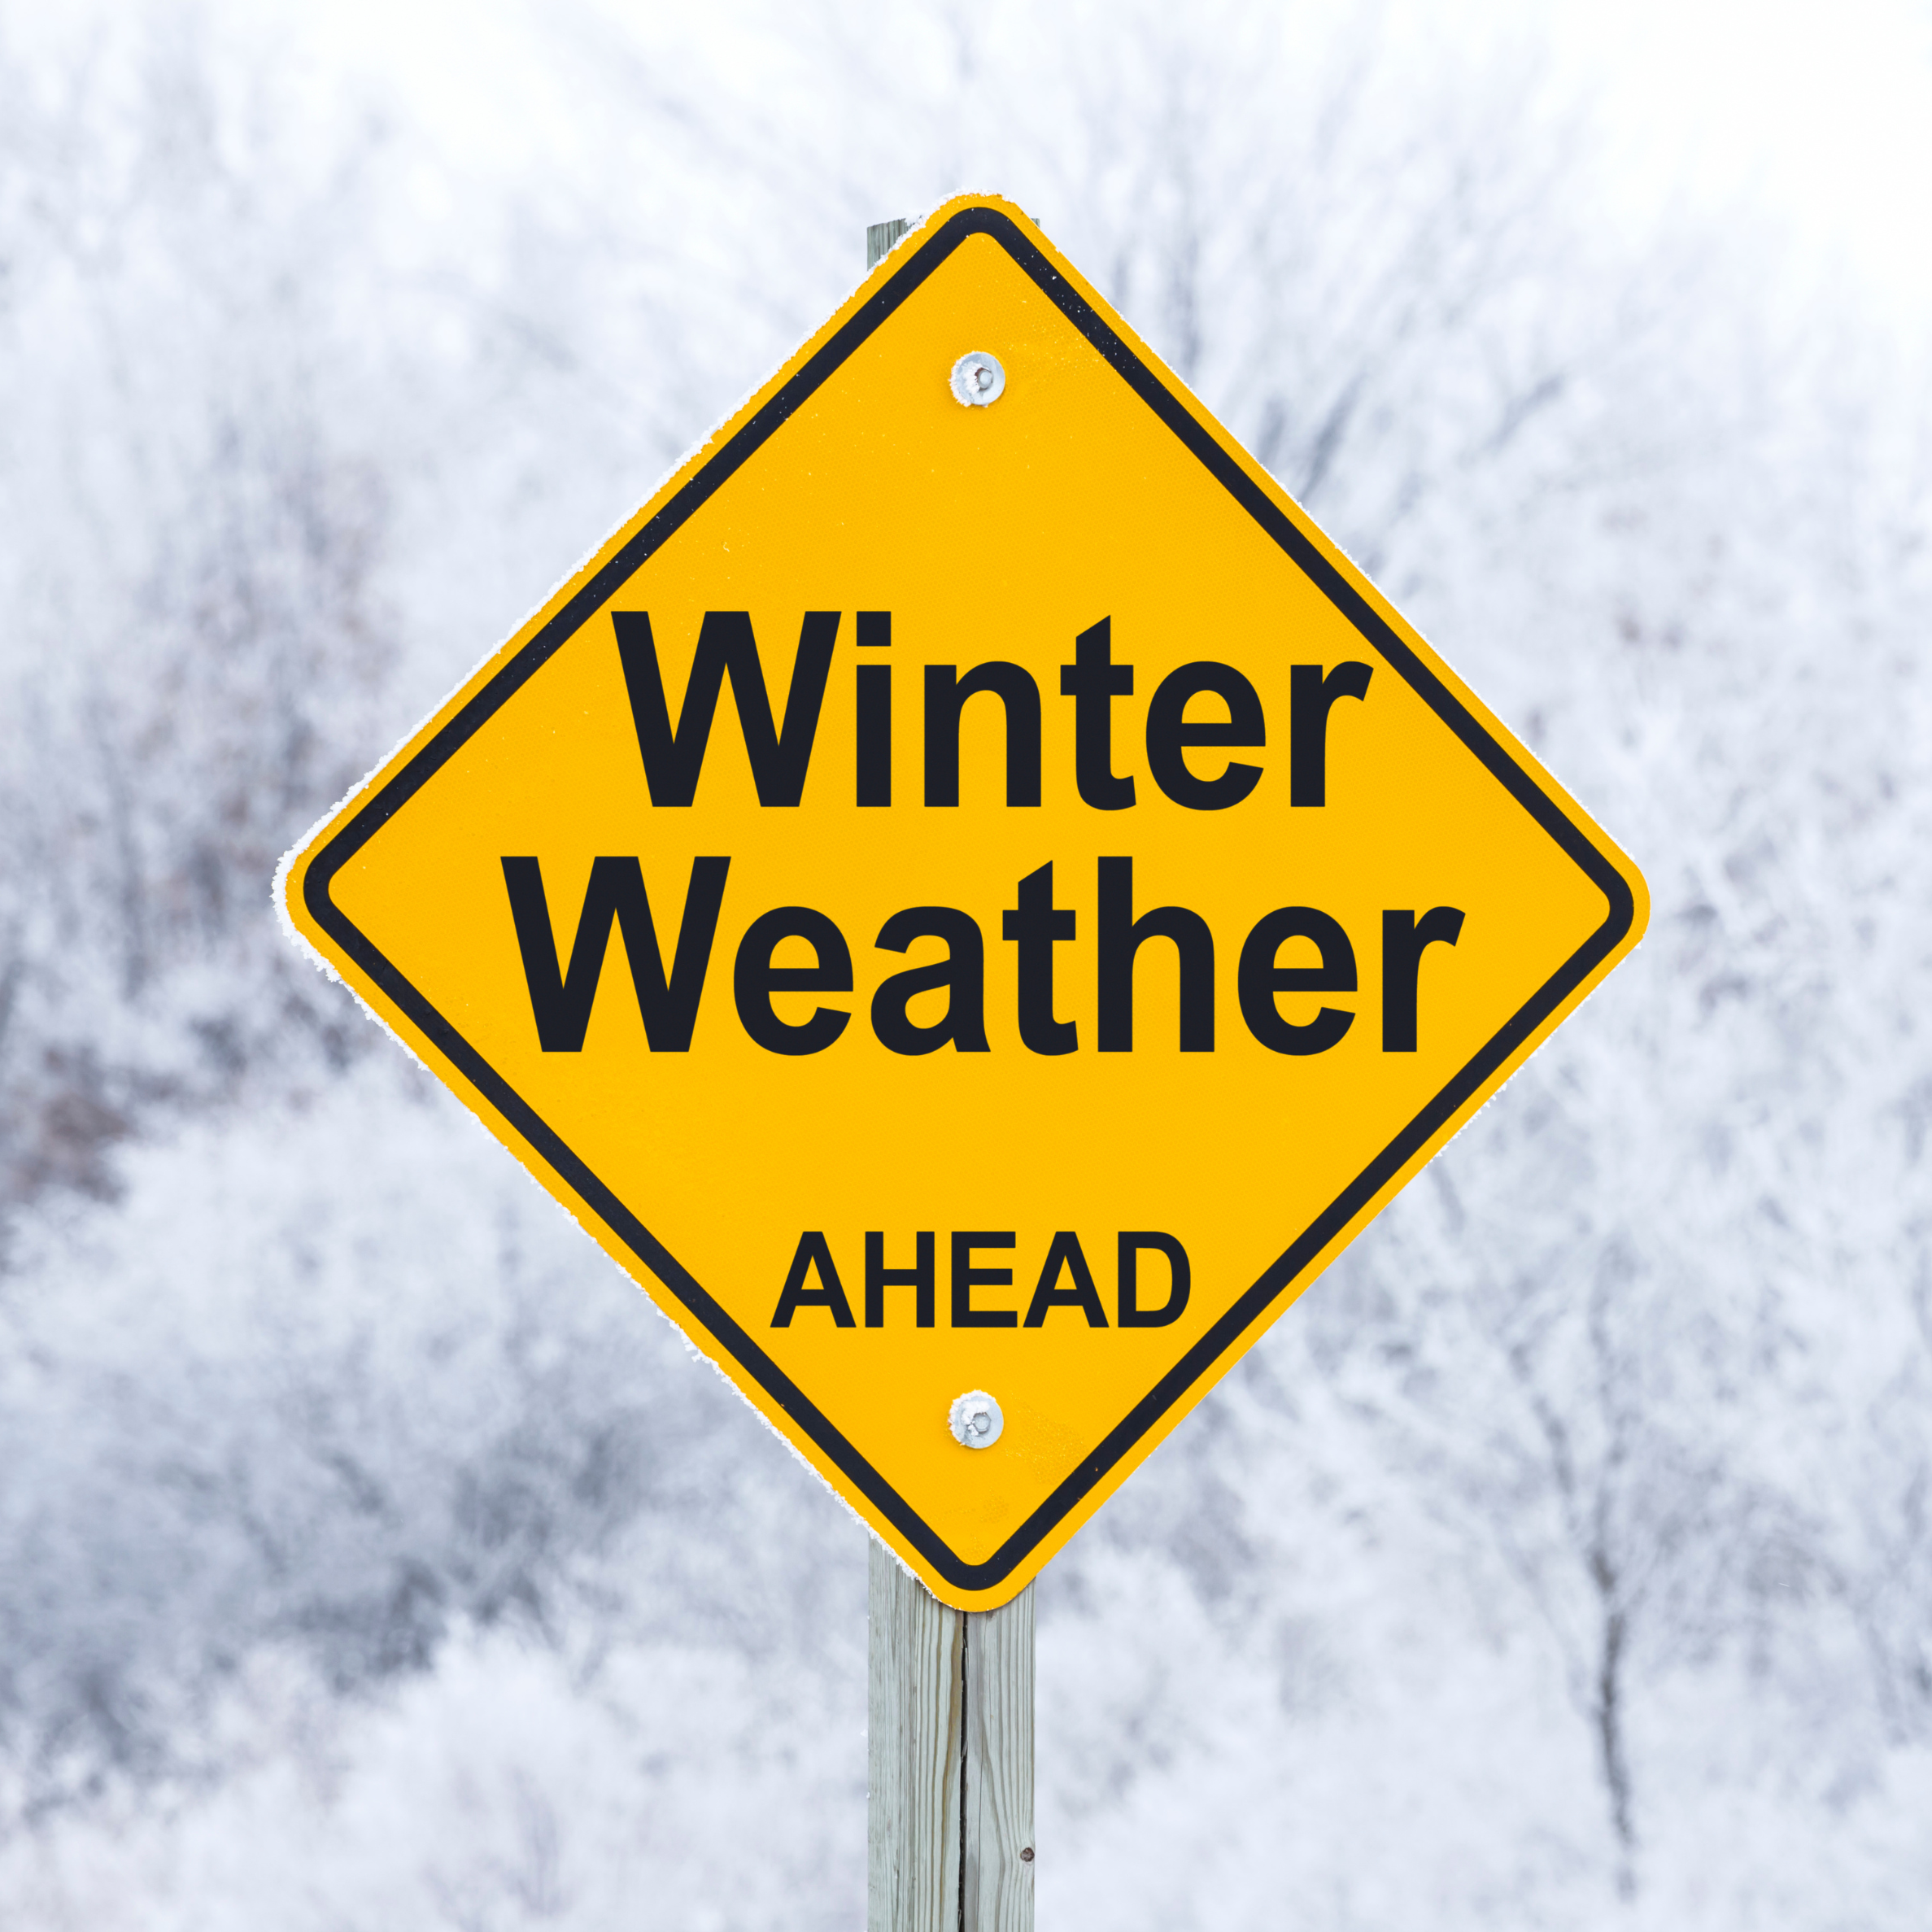 How to prepare your Communications for winter weather